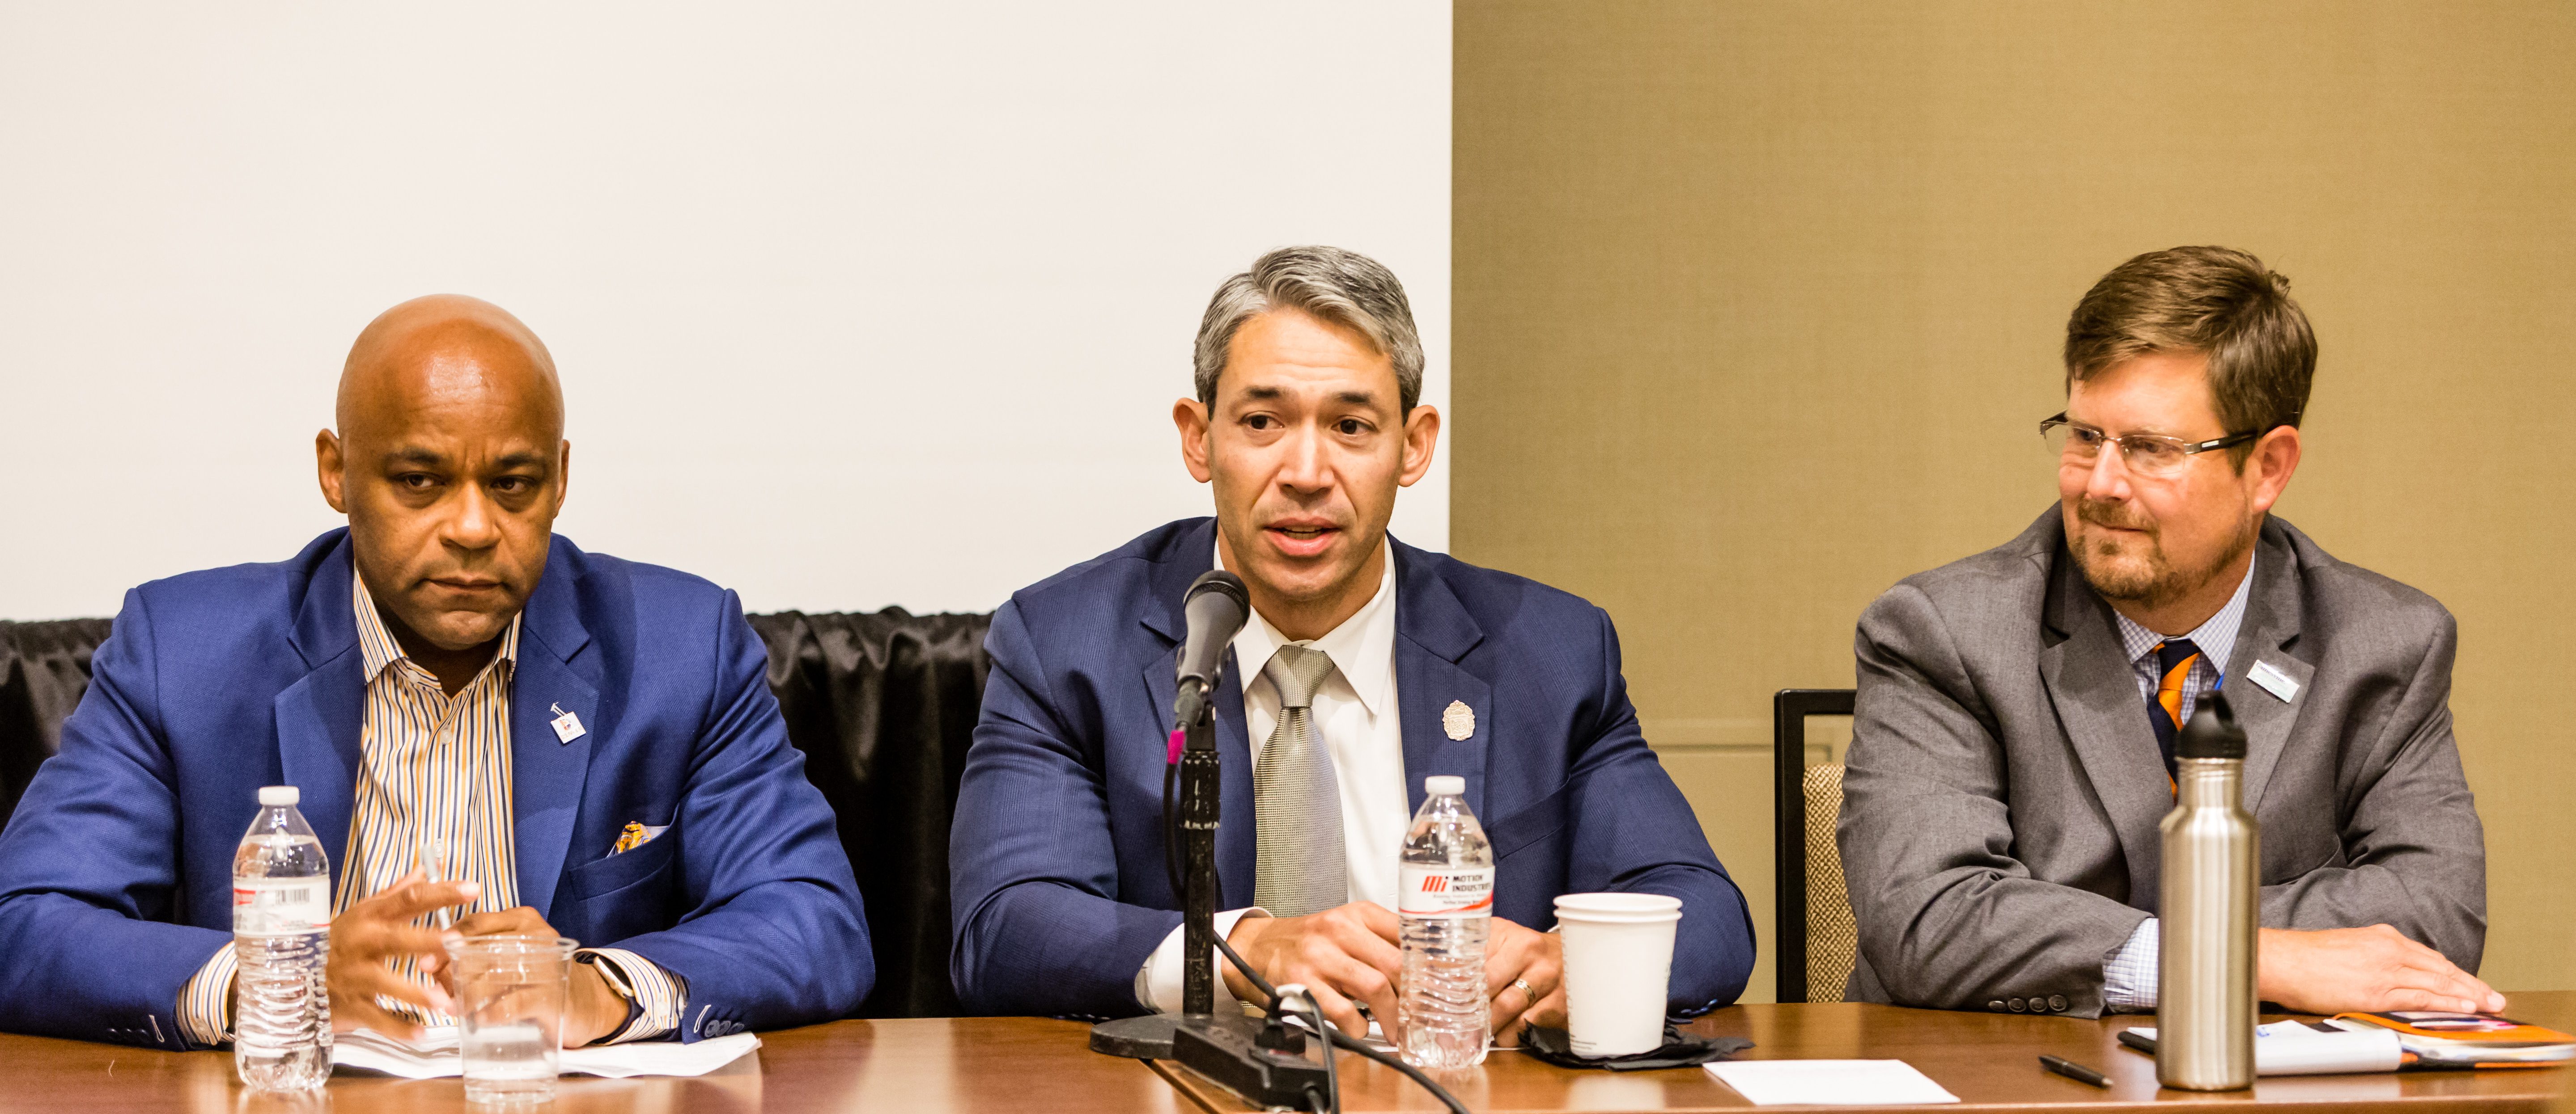 Ron Nirenberg Speaks at Human Face of Cities Leading the Way Panel